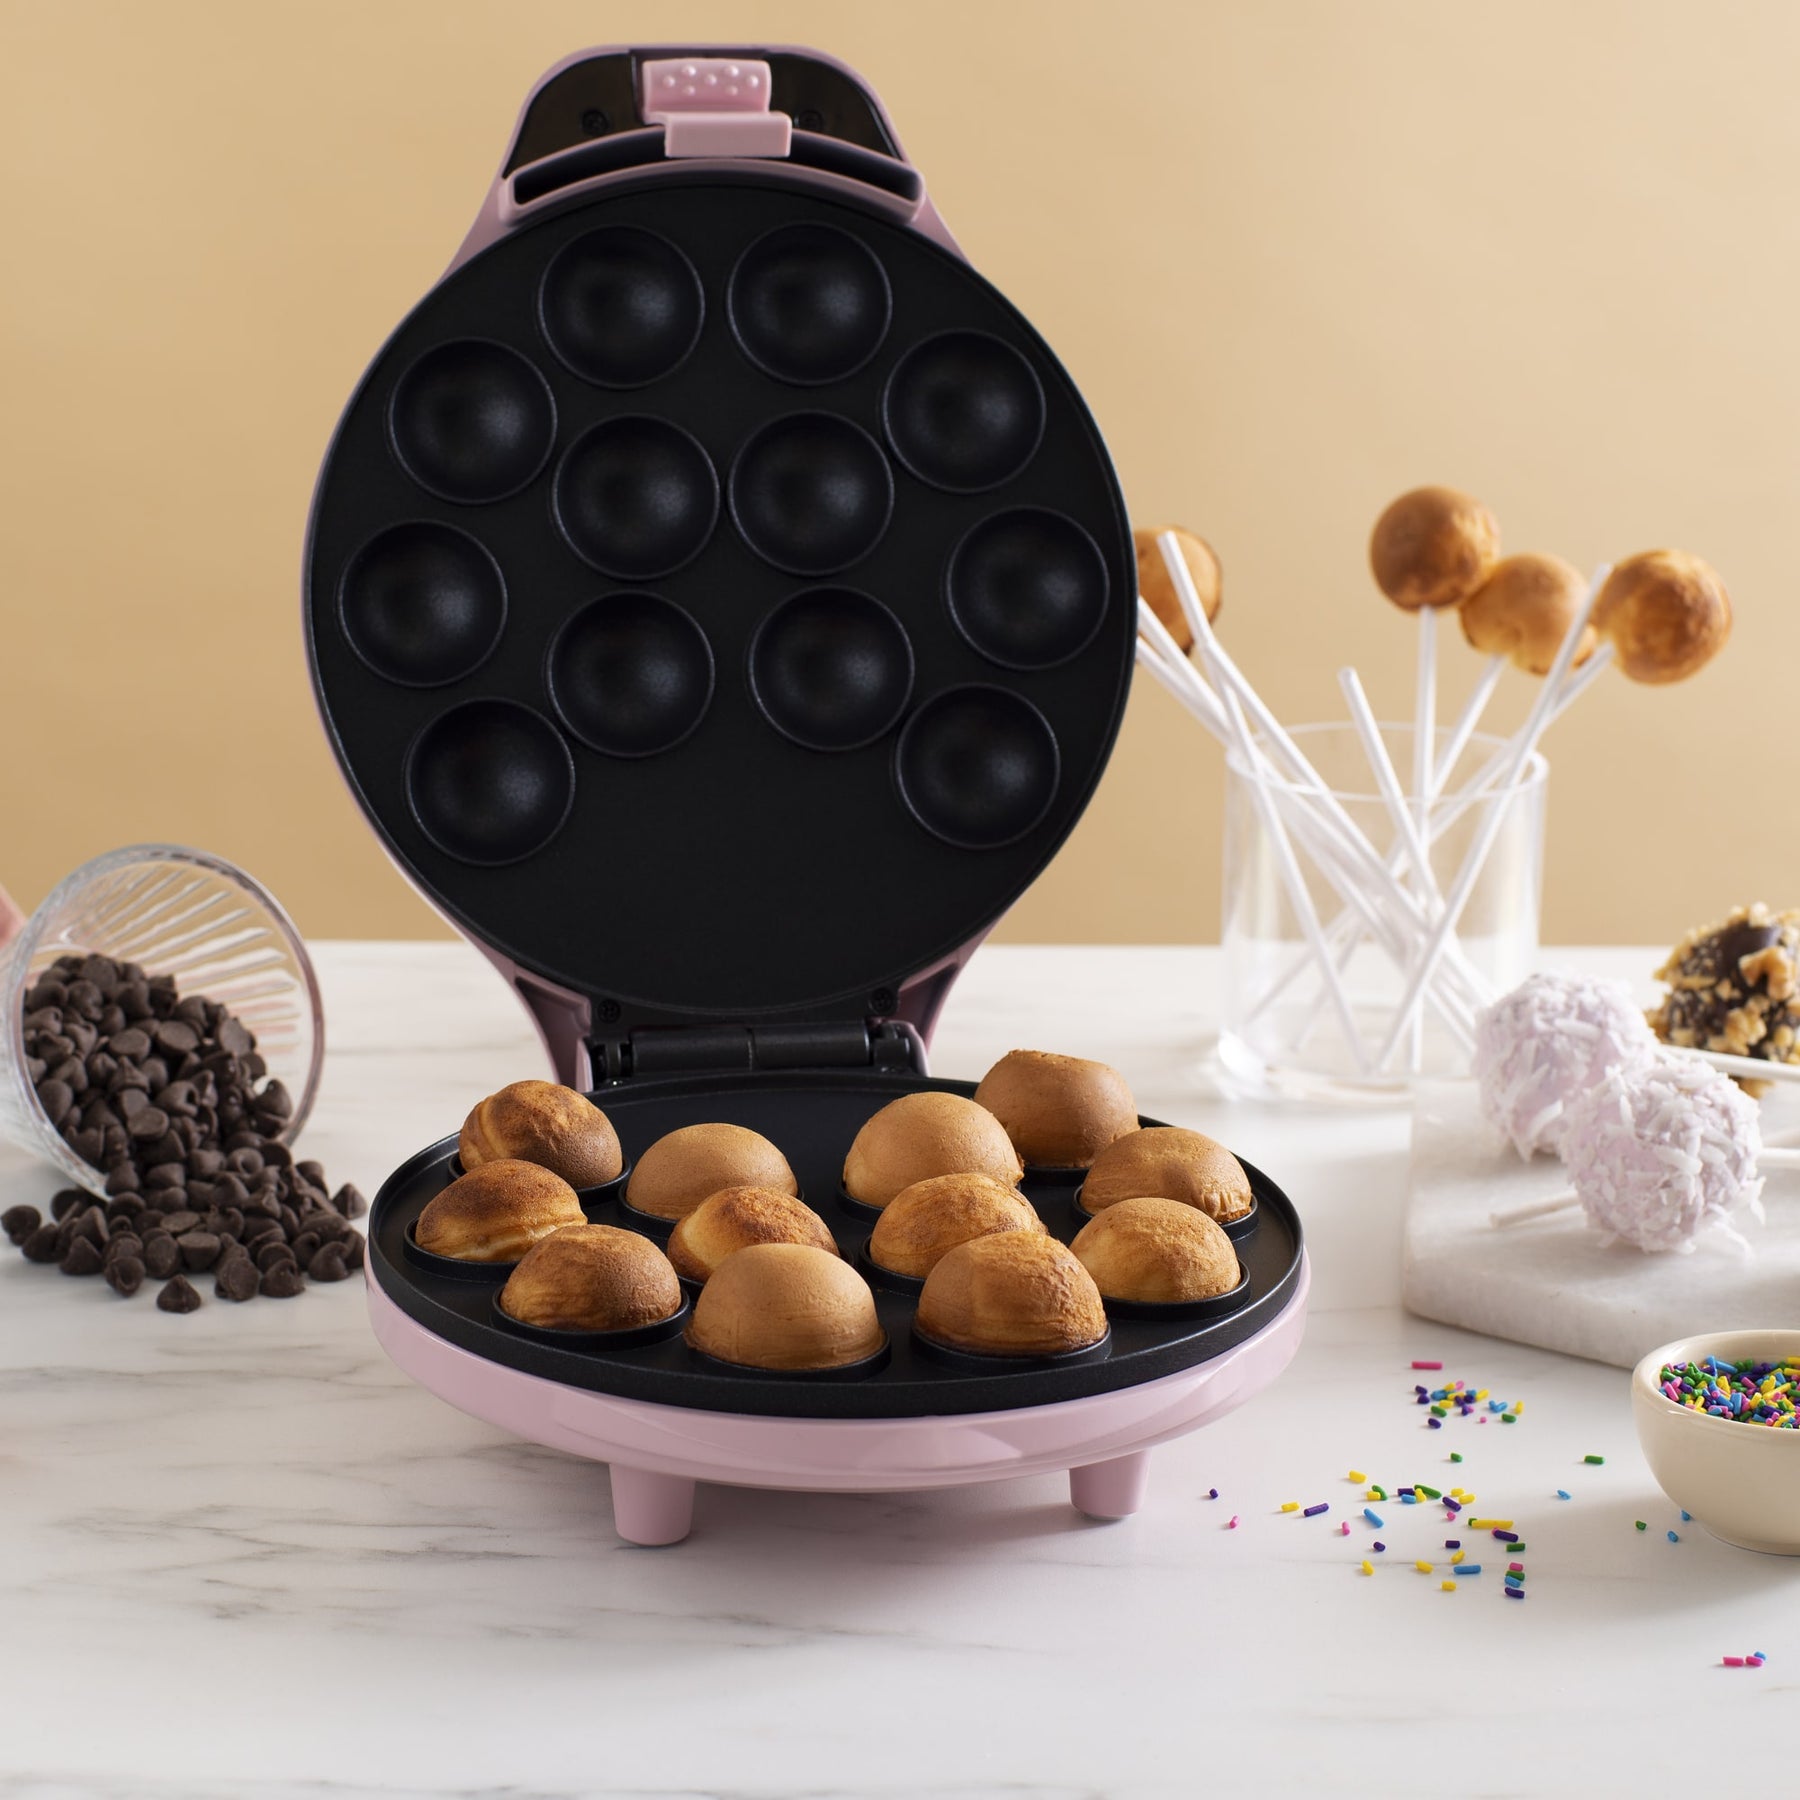 How to Make Cake Pops with a Cake Pop Maker - In the Kitch